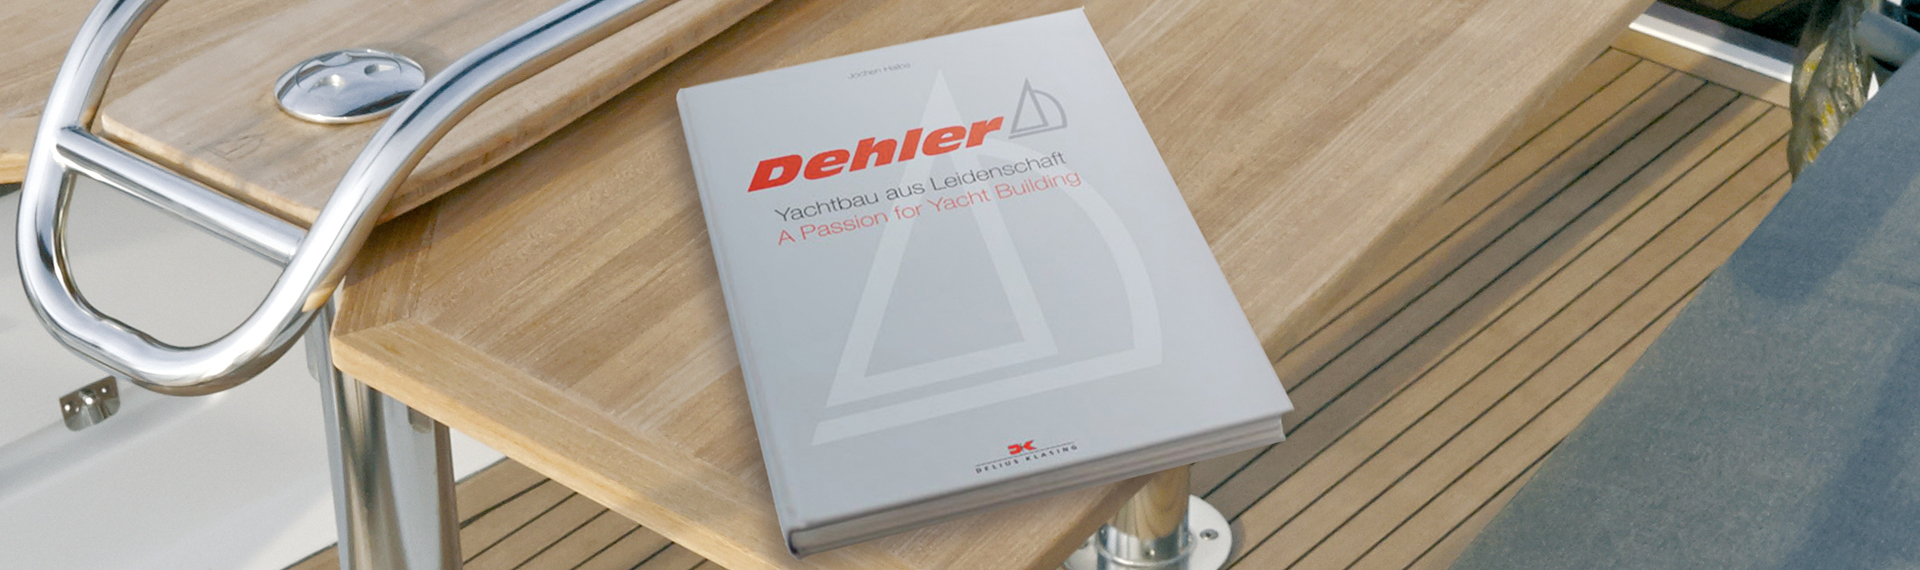 Fifty years of Dehler sailboats hard cover book covering the more than sixty types of boats produced